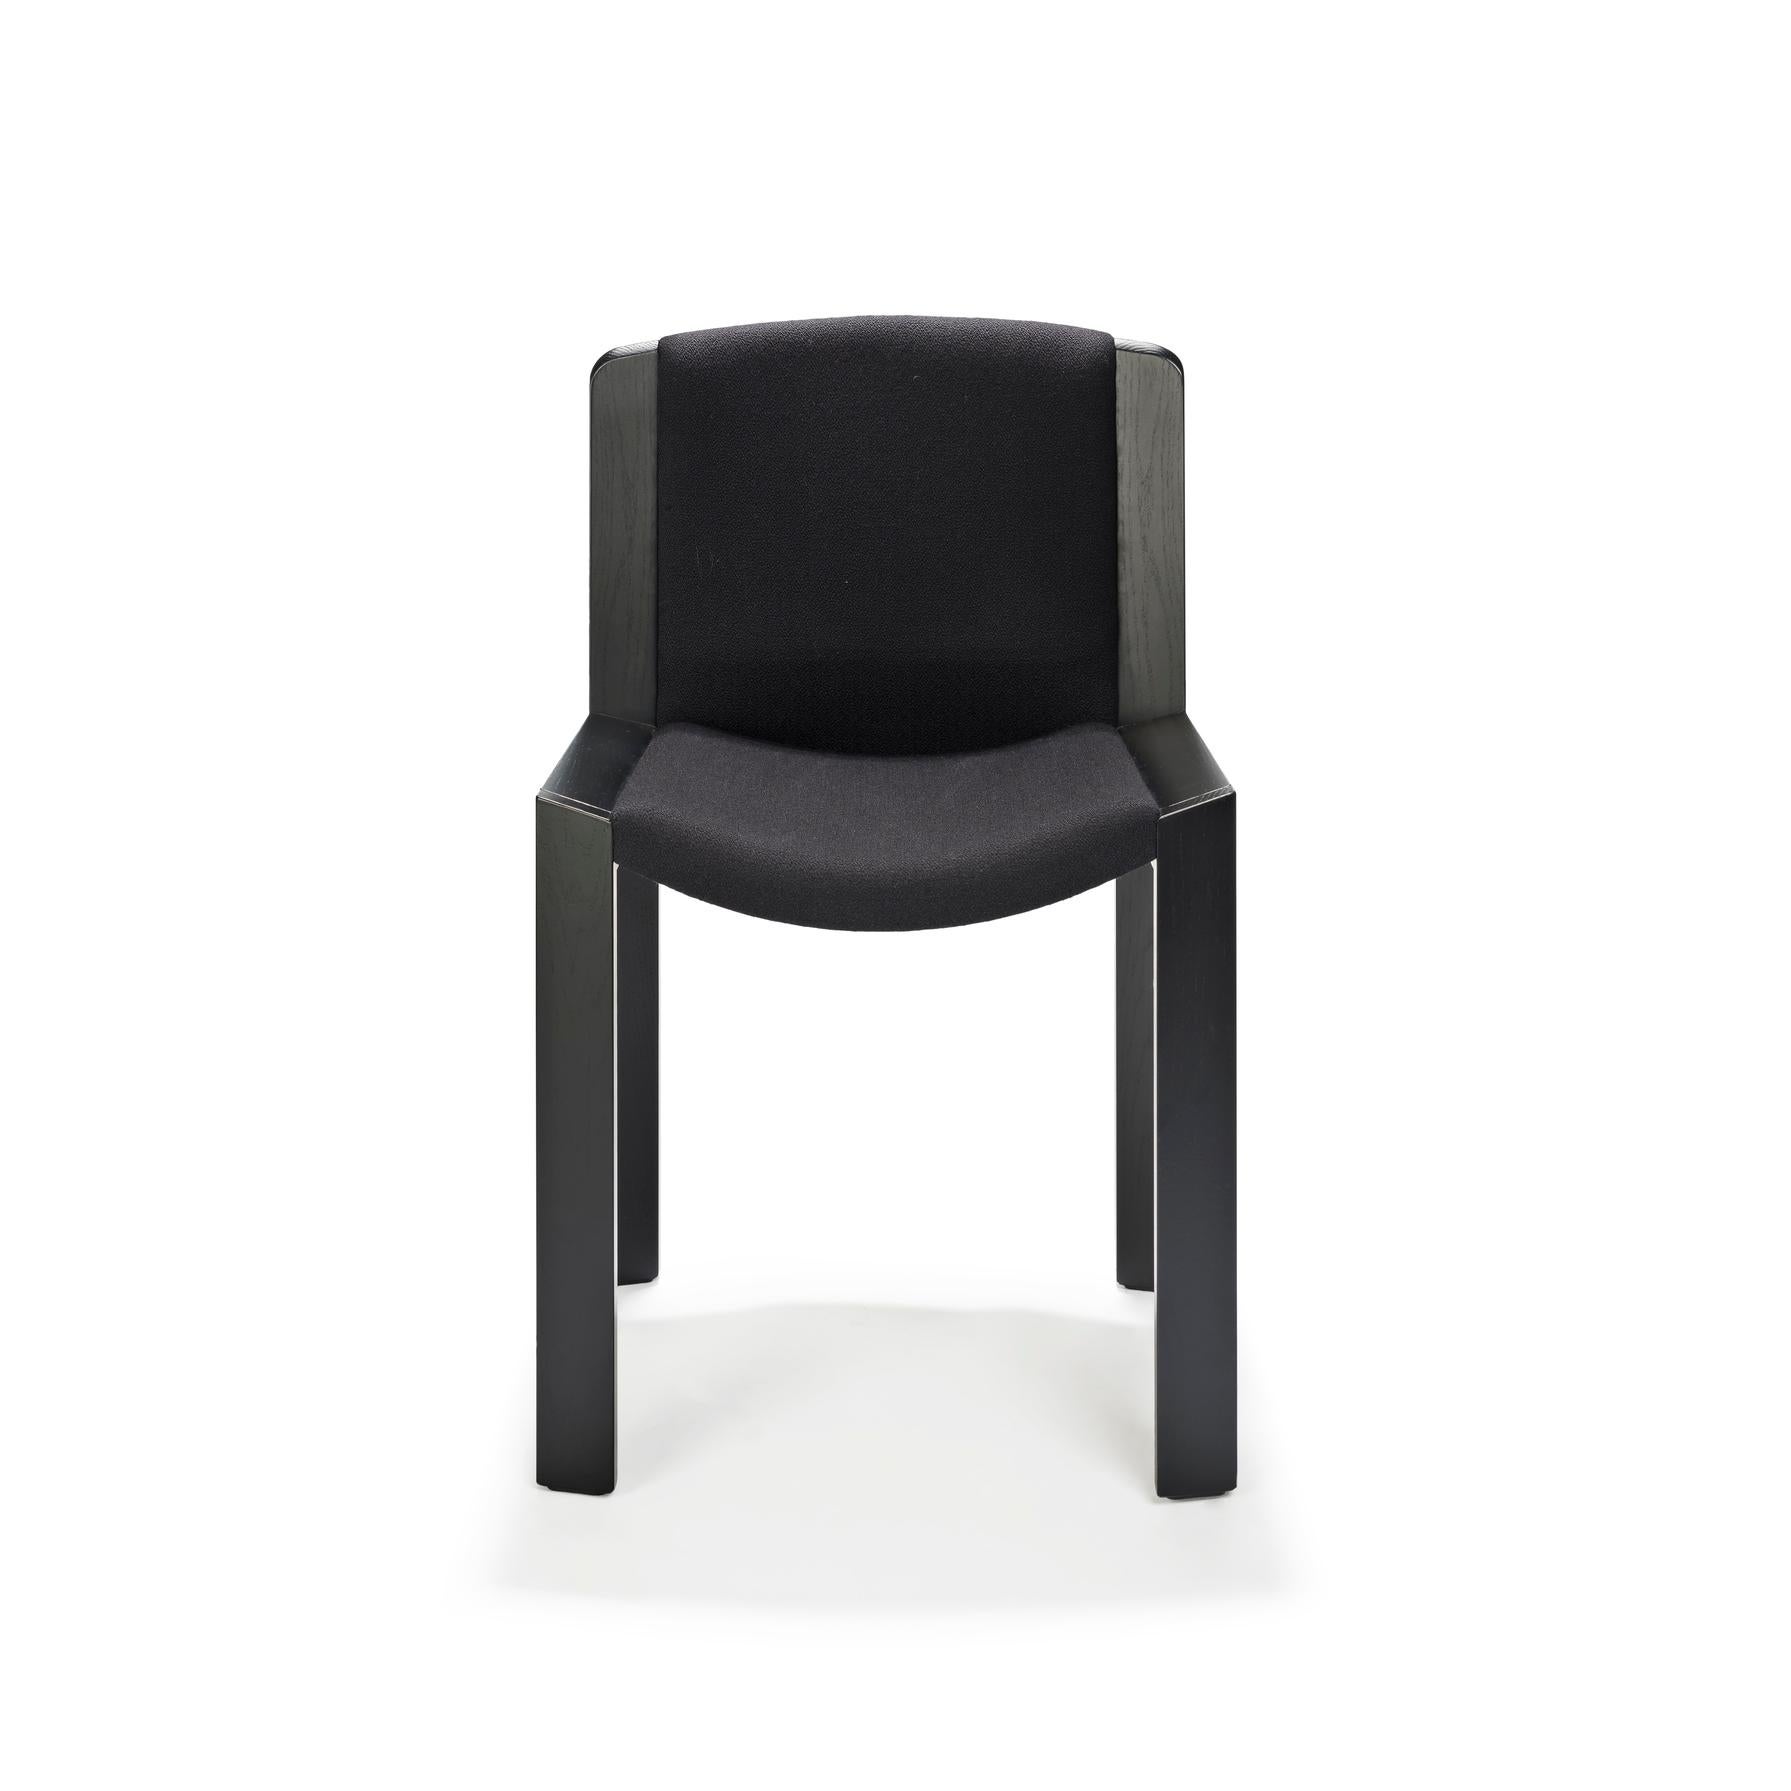 Chair designed by Joe Colombo in 1965. 

Designed by the forward-thinking Italian designer Joe Colombo, Chair 300 is a beautiful example of his functional design sensibility. Upholstered seat and back gently curved inside a modest, clear wooden